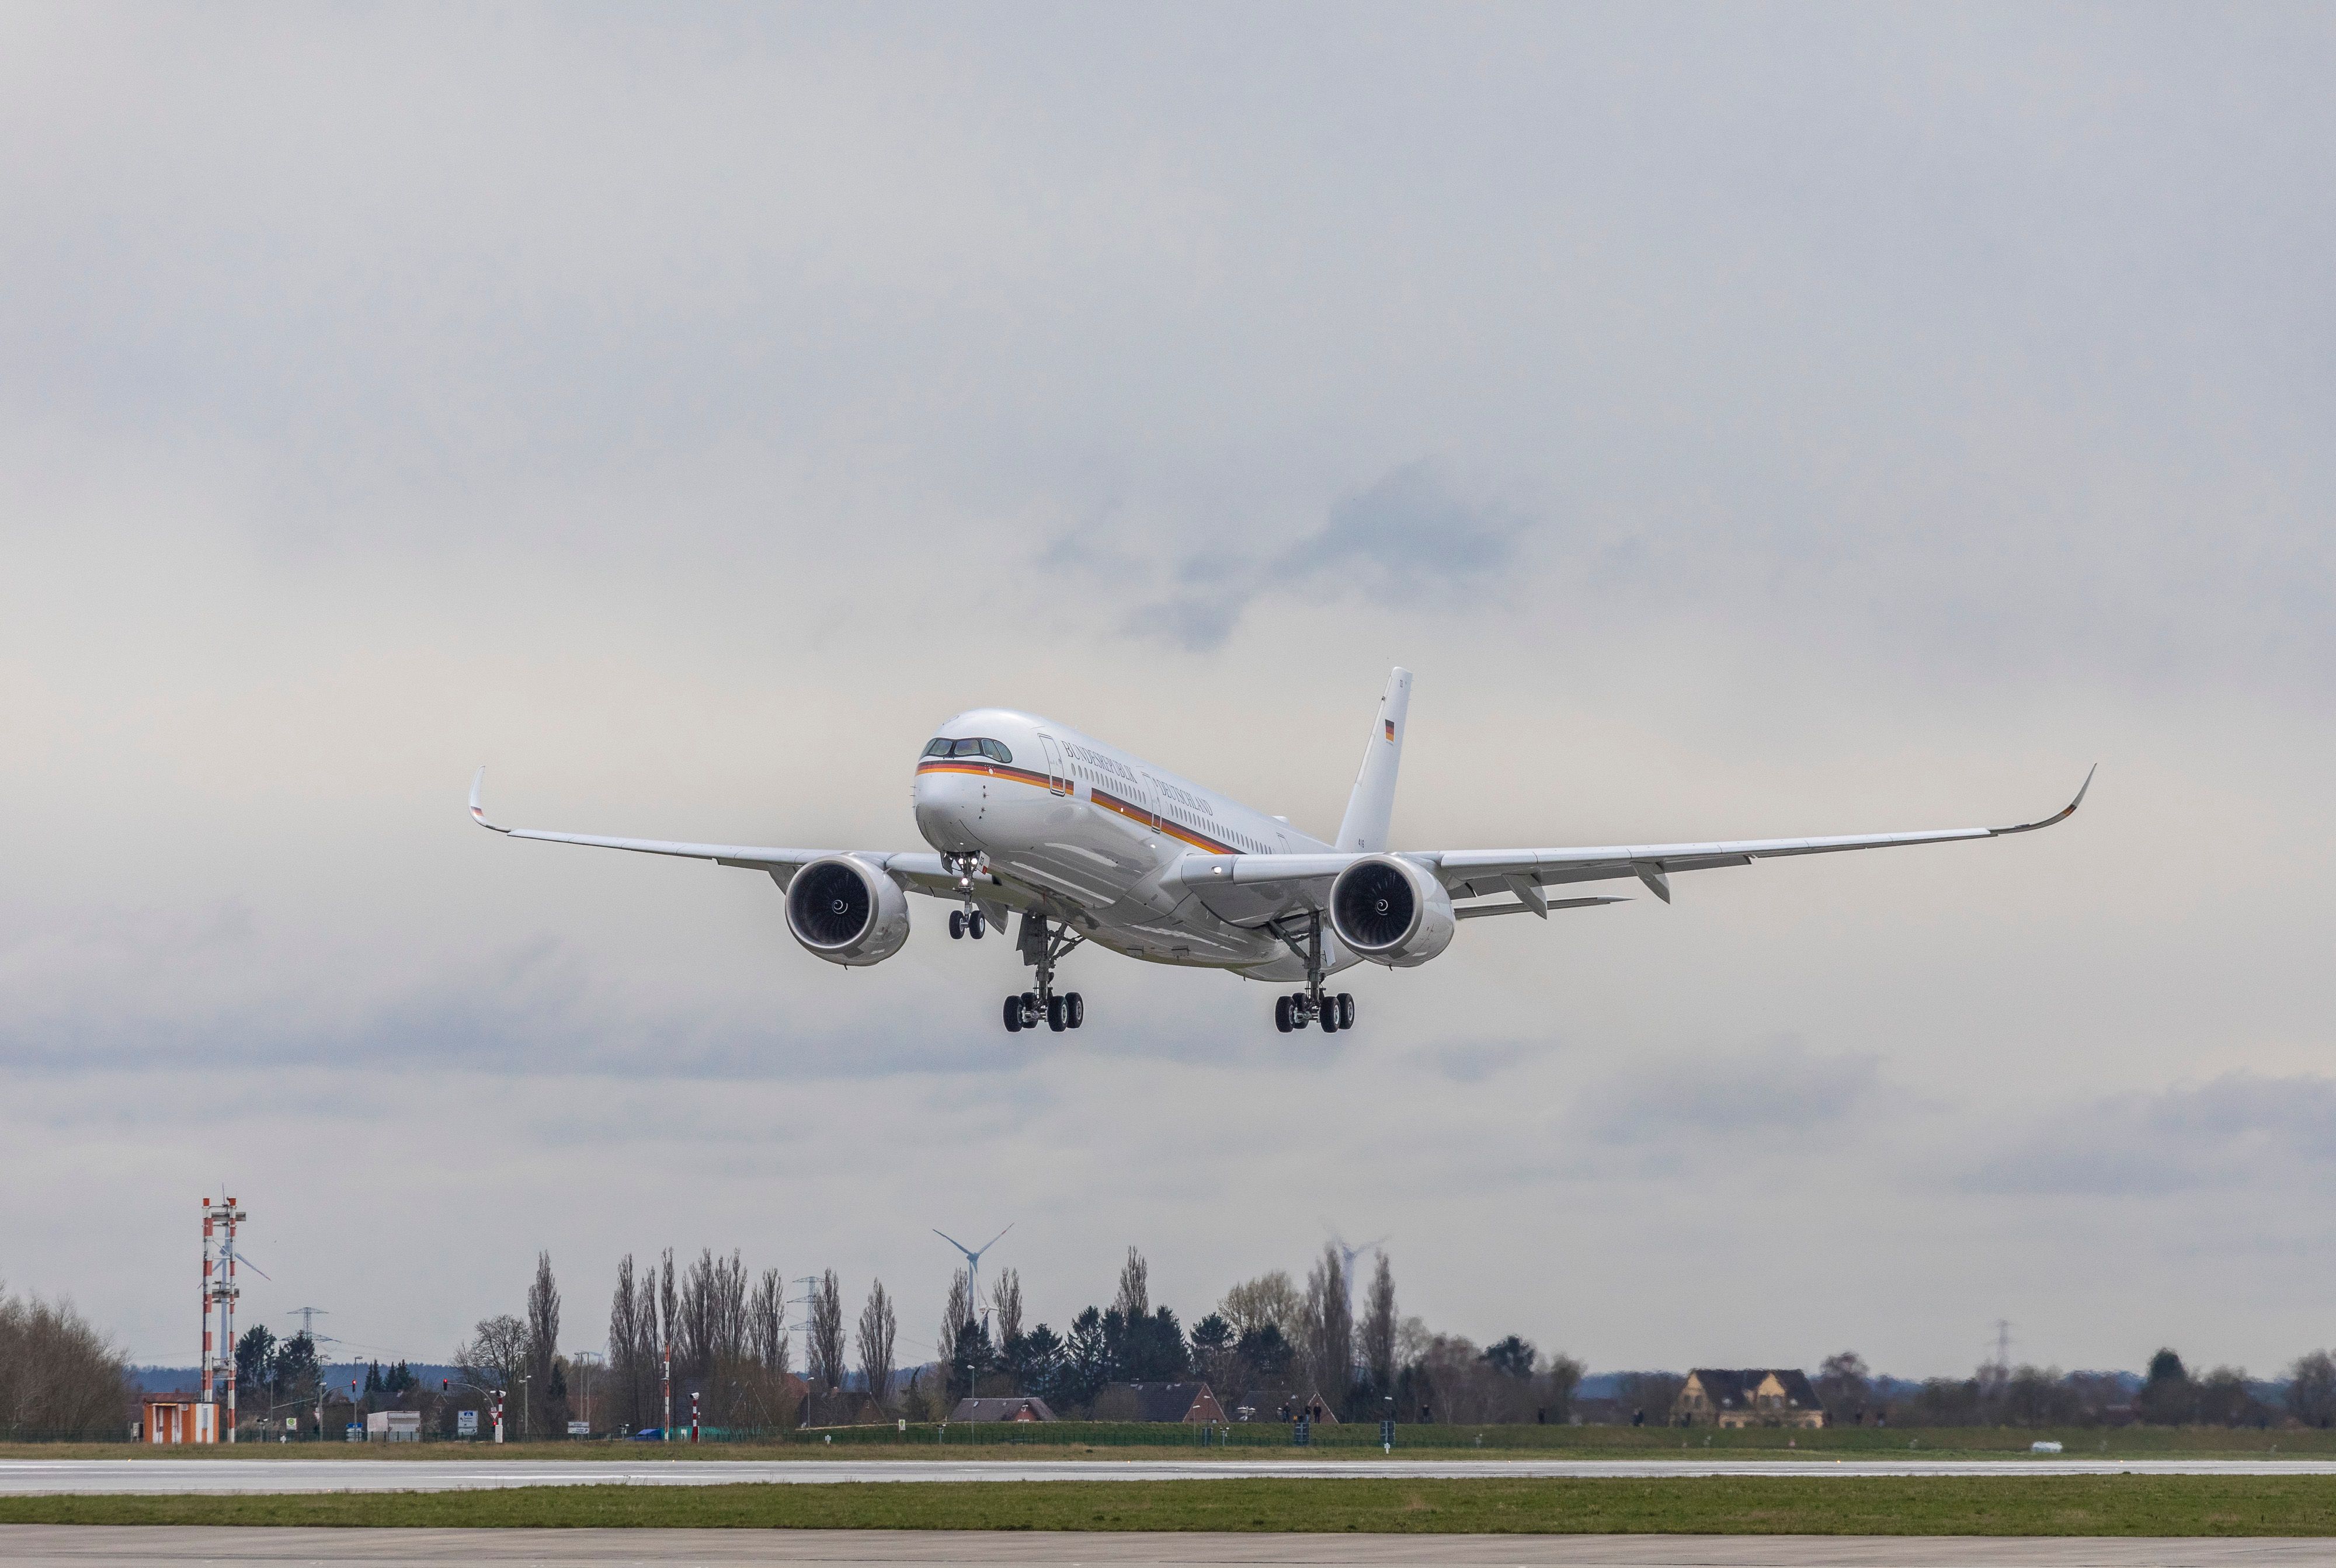 The German Air Force One , an Airbus ACJ350, about to land on a runway.